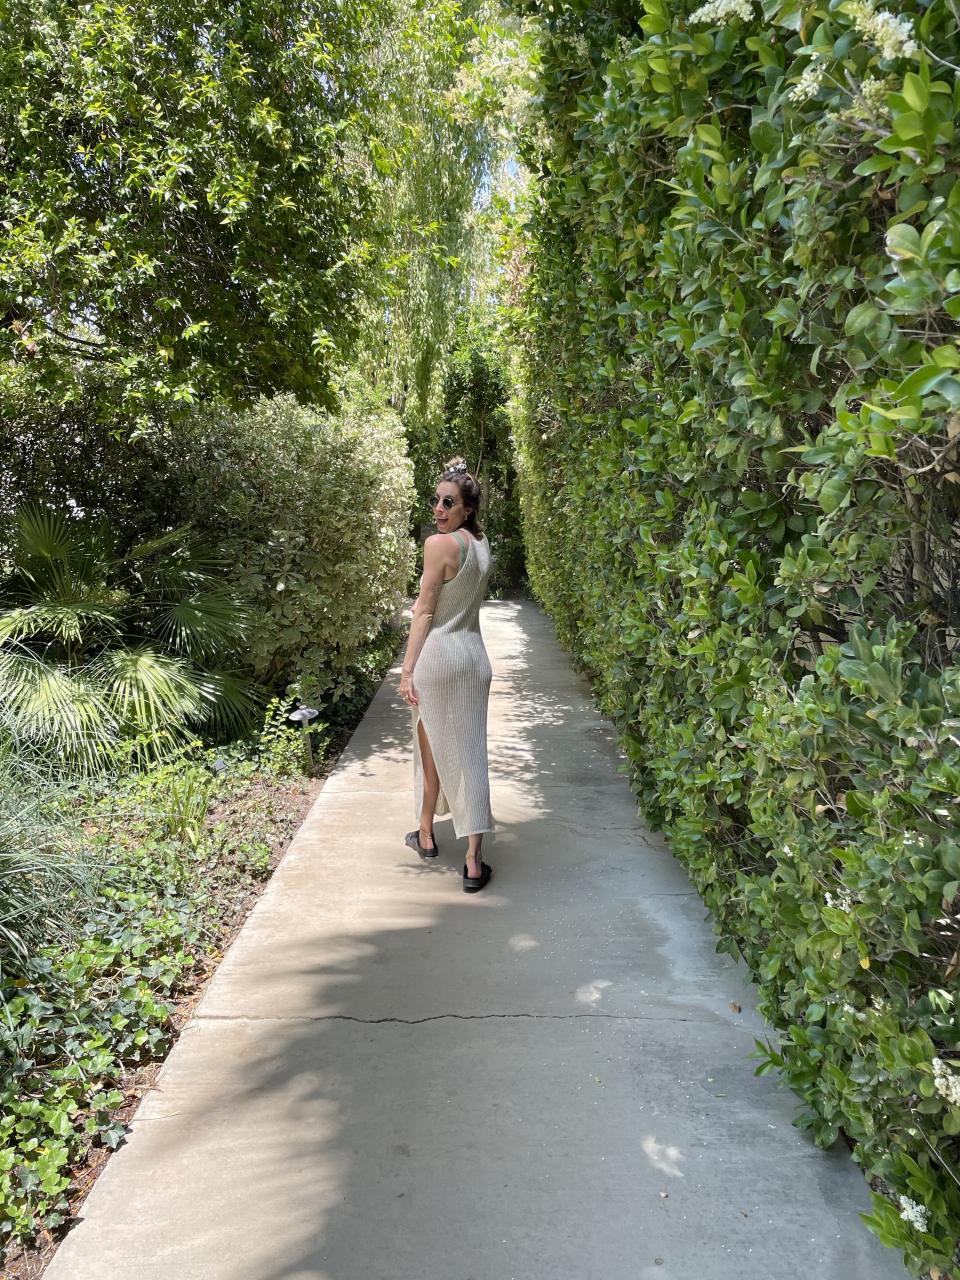 Lara, the author, walking along the concrete path that connects the hotel's grounds